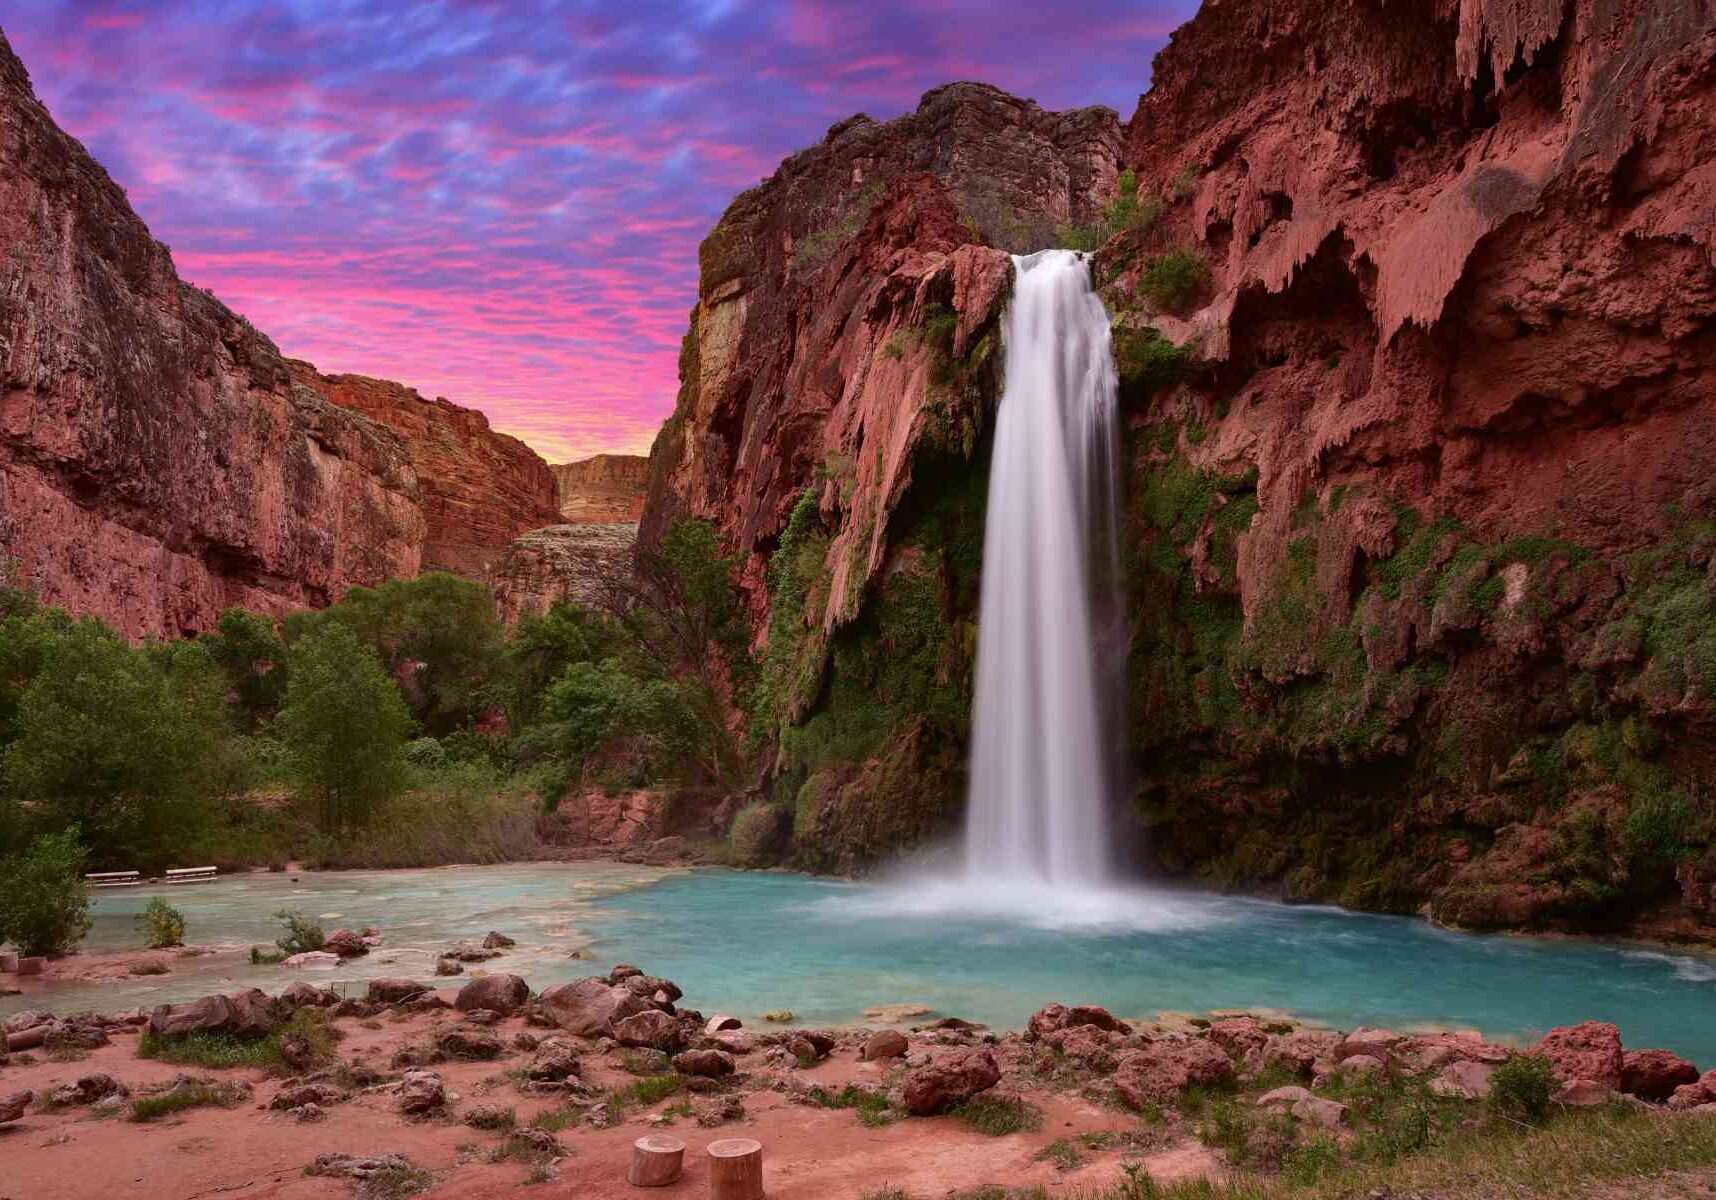 vibrant pink sky with red cliffs. and Havasu Falls waterfall flowing into a blue pool below.